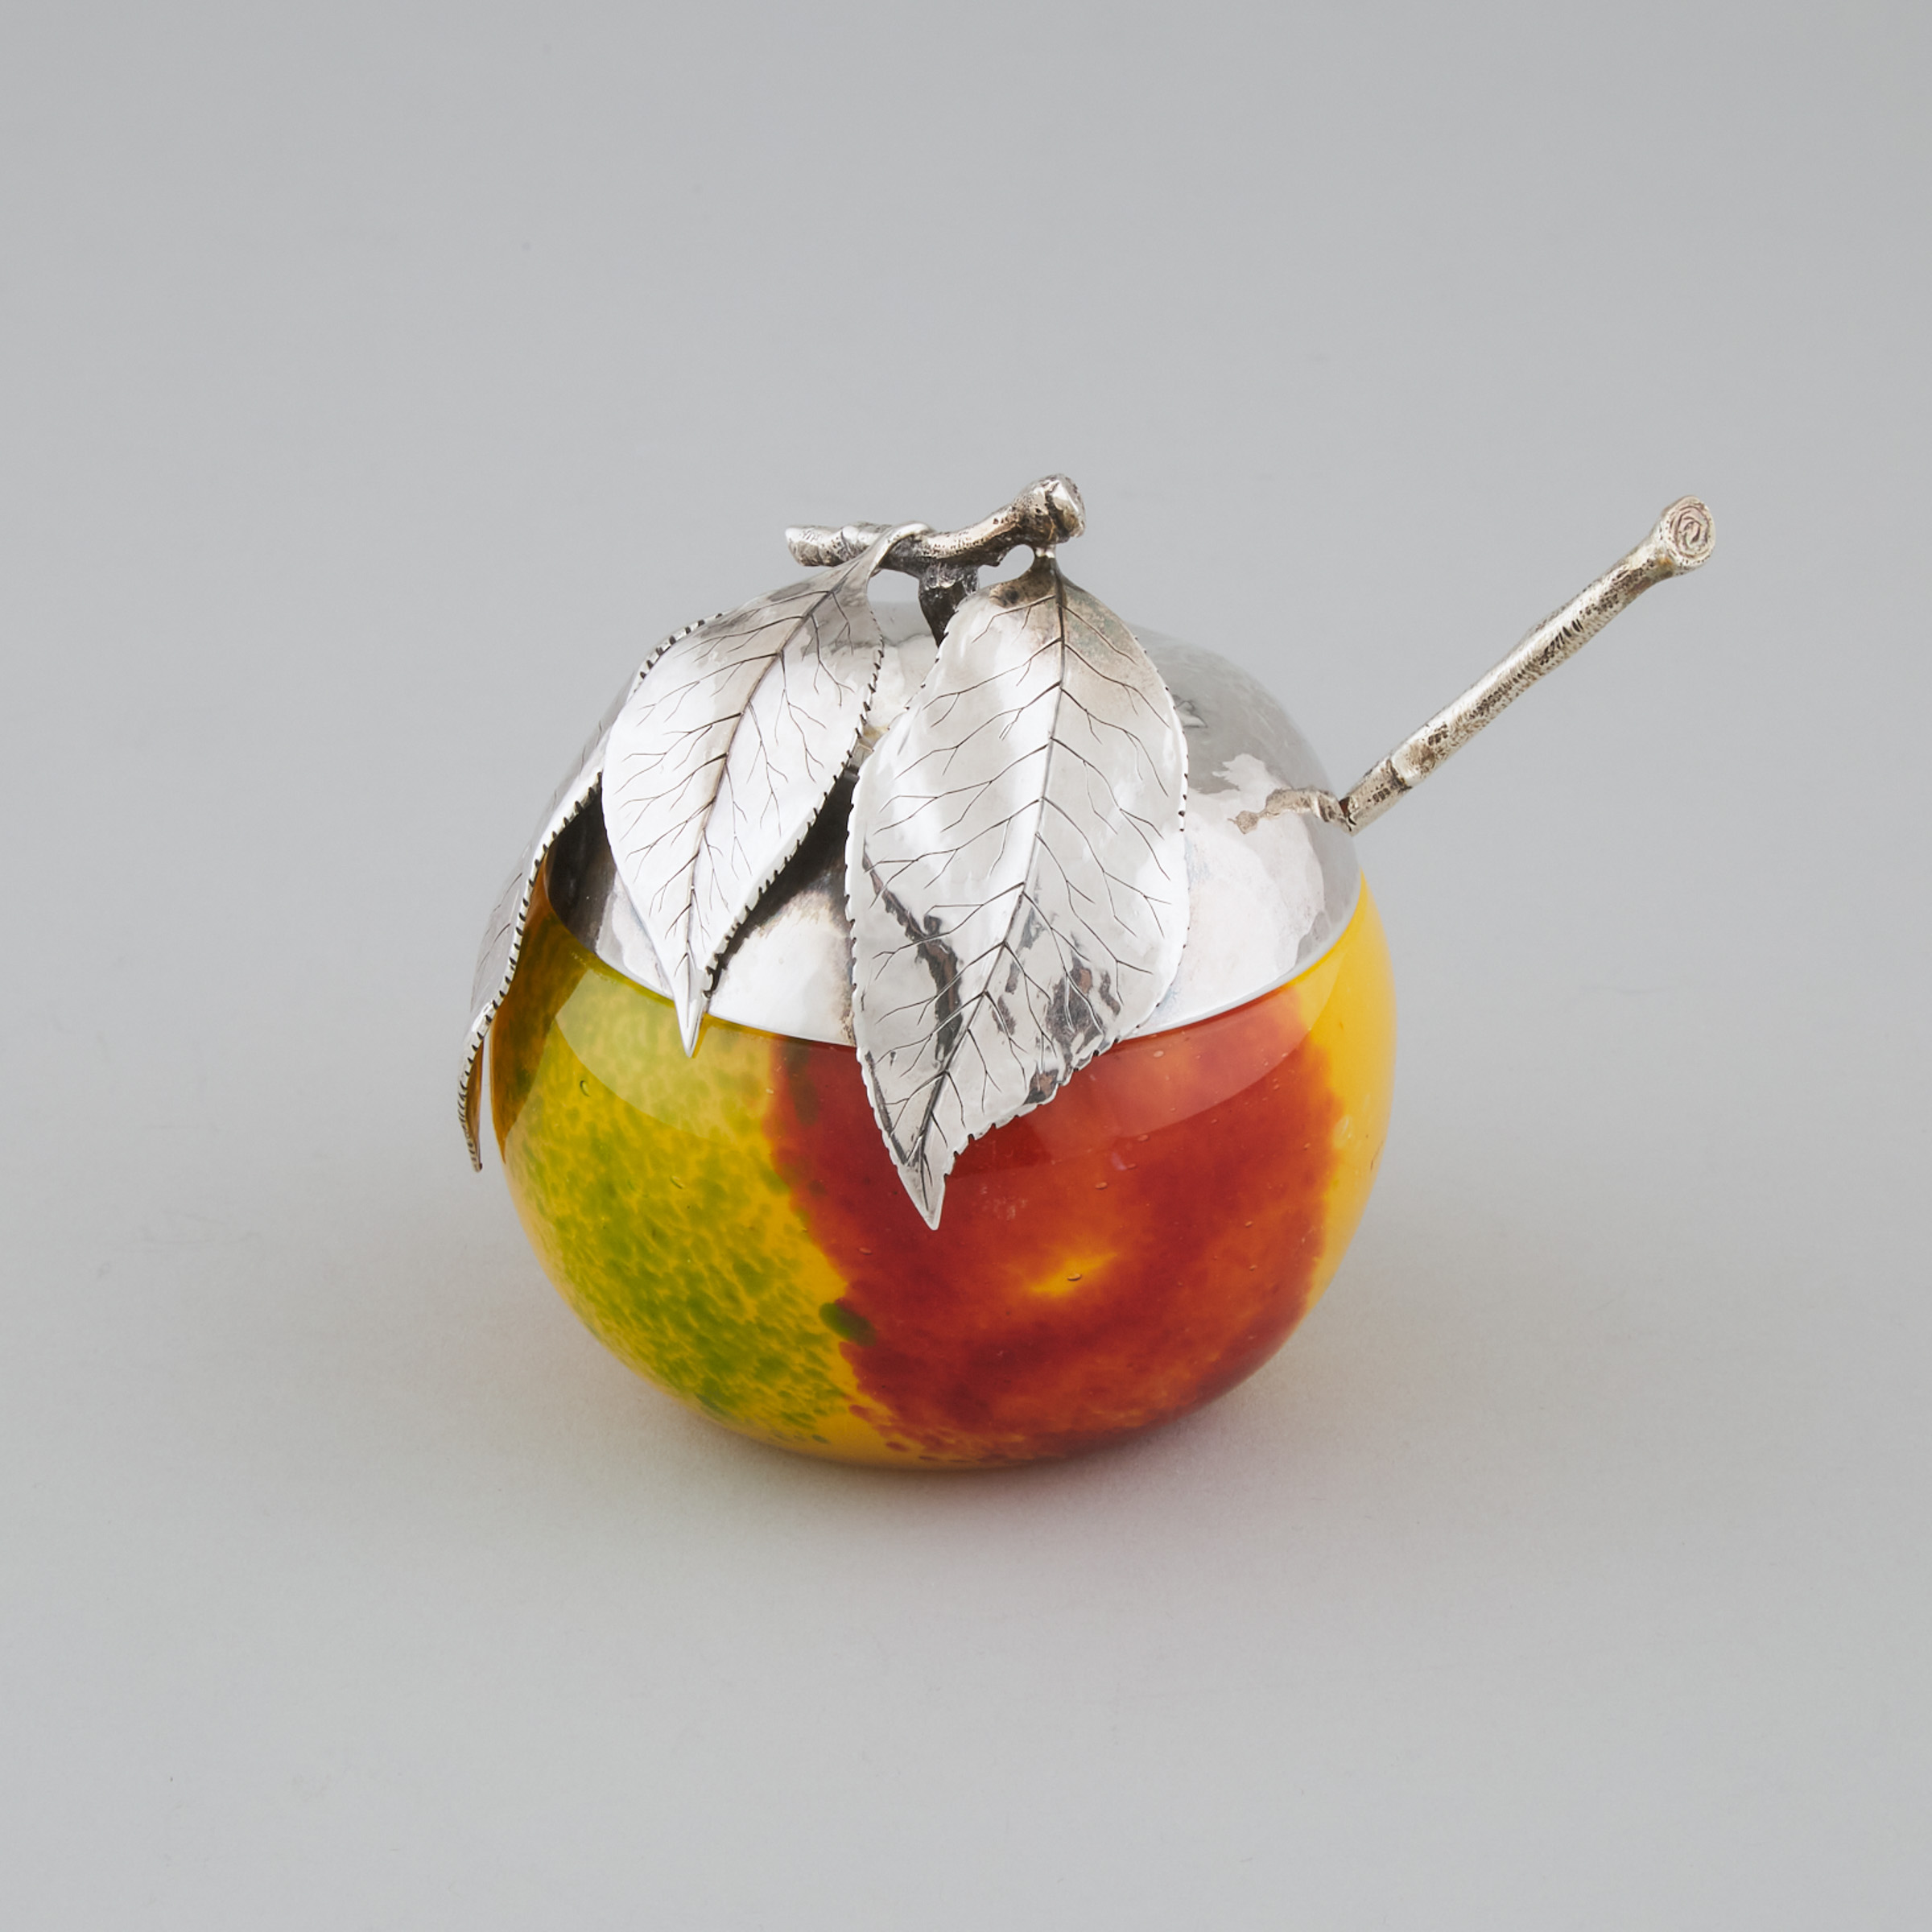 Italian Silver and Coloured Glass Apple-Form Preserve Jar with Spoon, Buccellati, Milan, 20th century